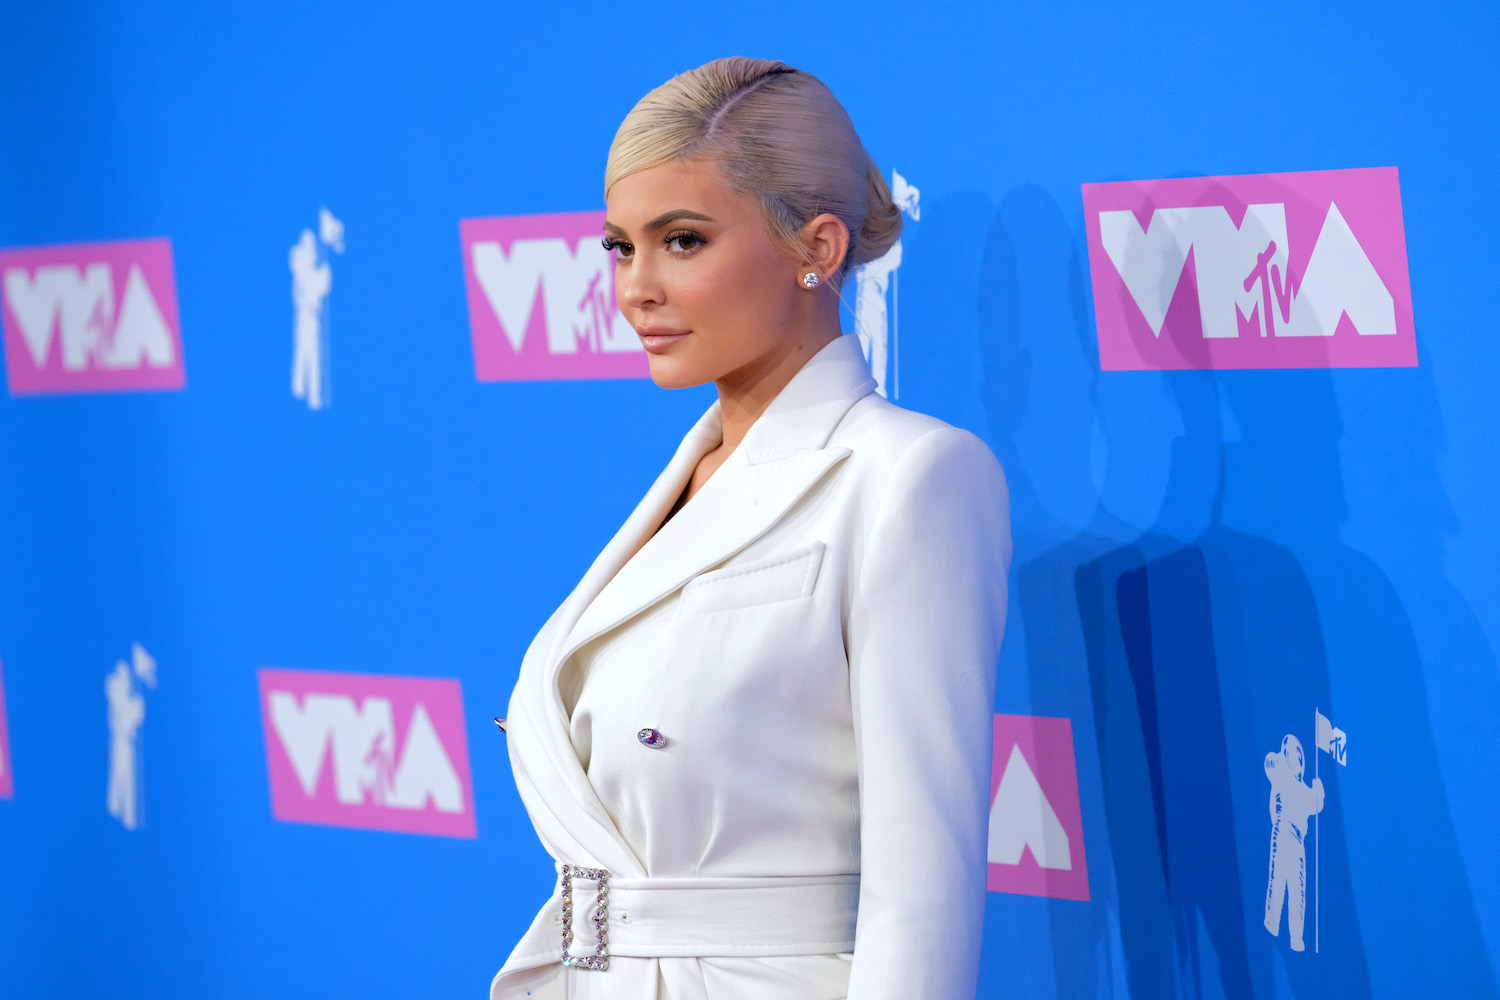 Kylie Jenner attends the 2018 MTV Video Music Awards at Radio City Music Hall